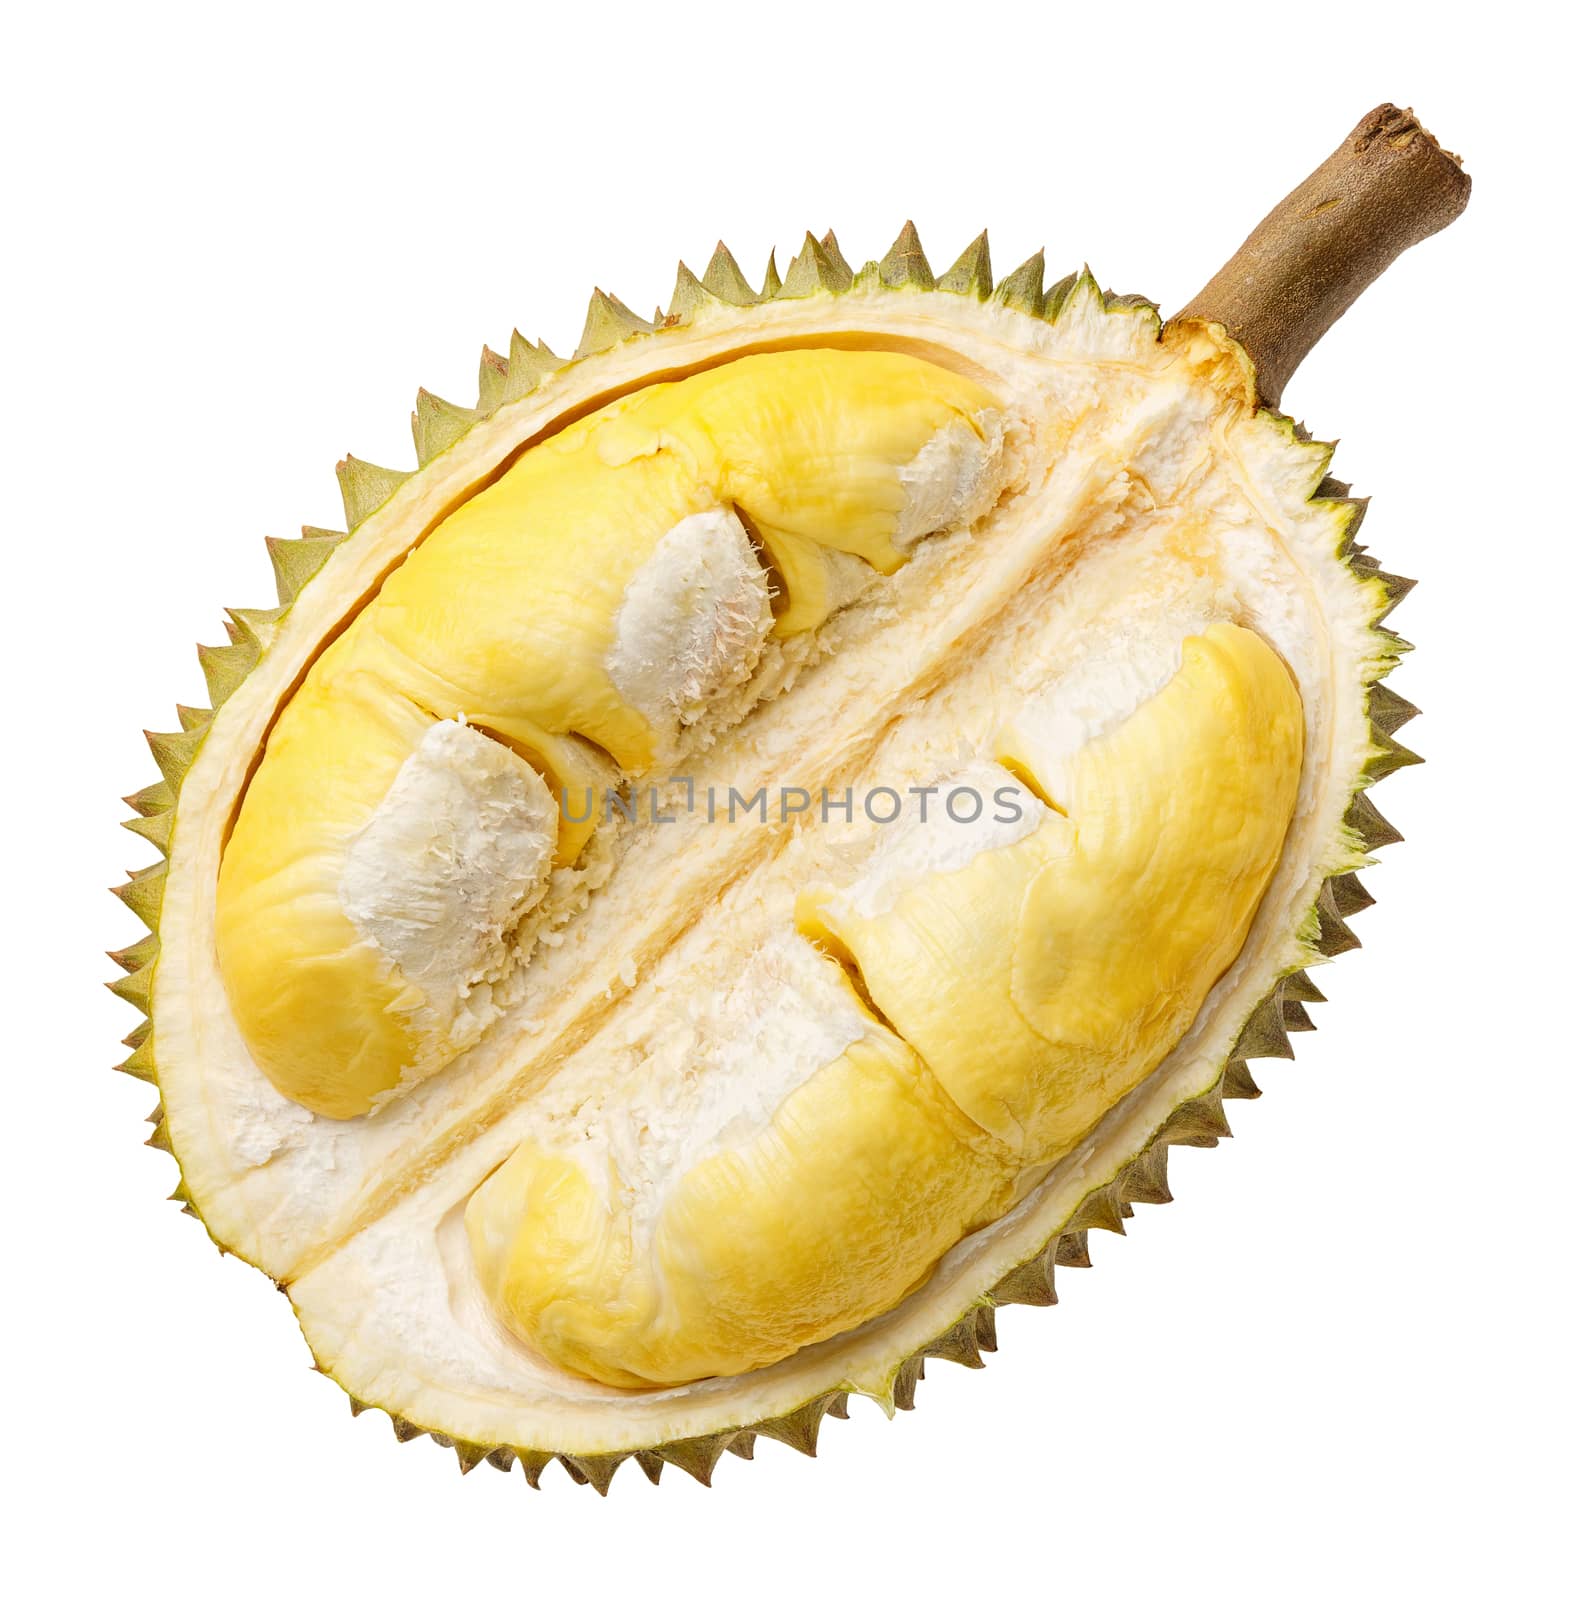 Durian fruit portion isolated on white background